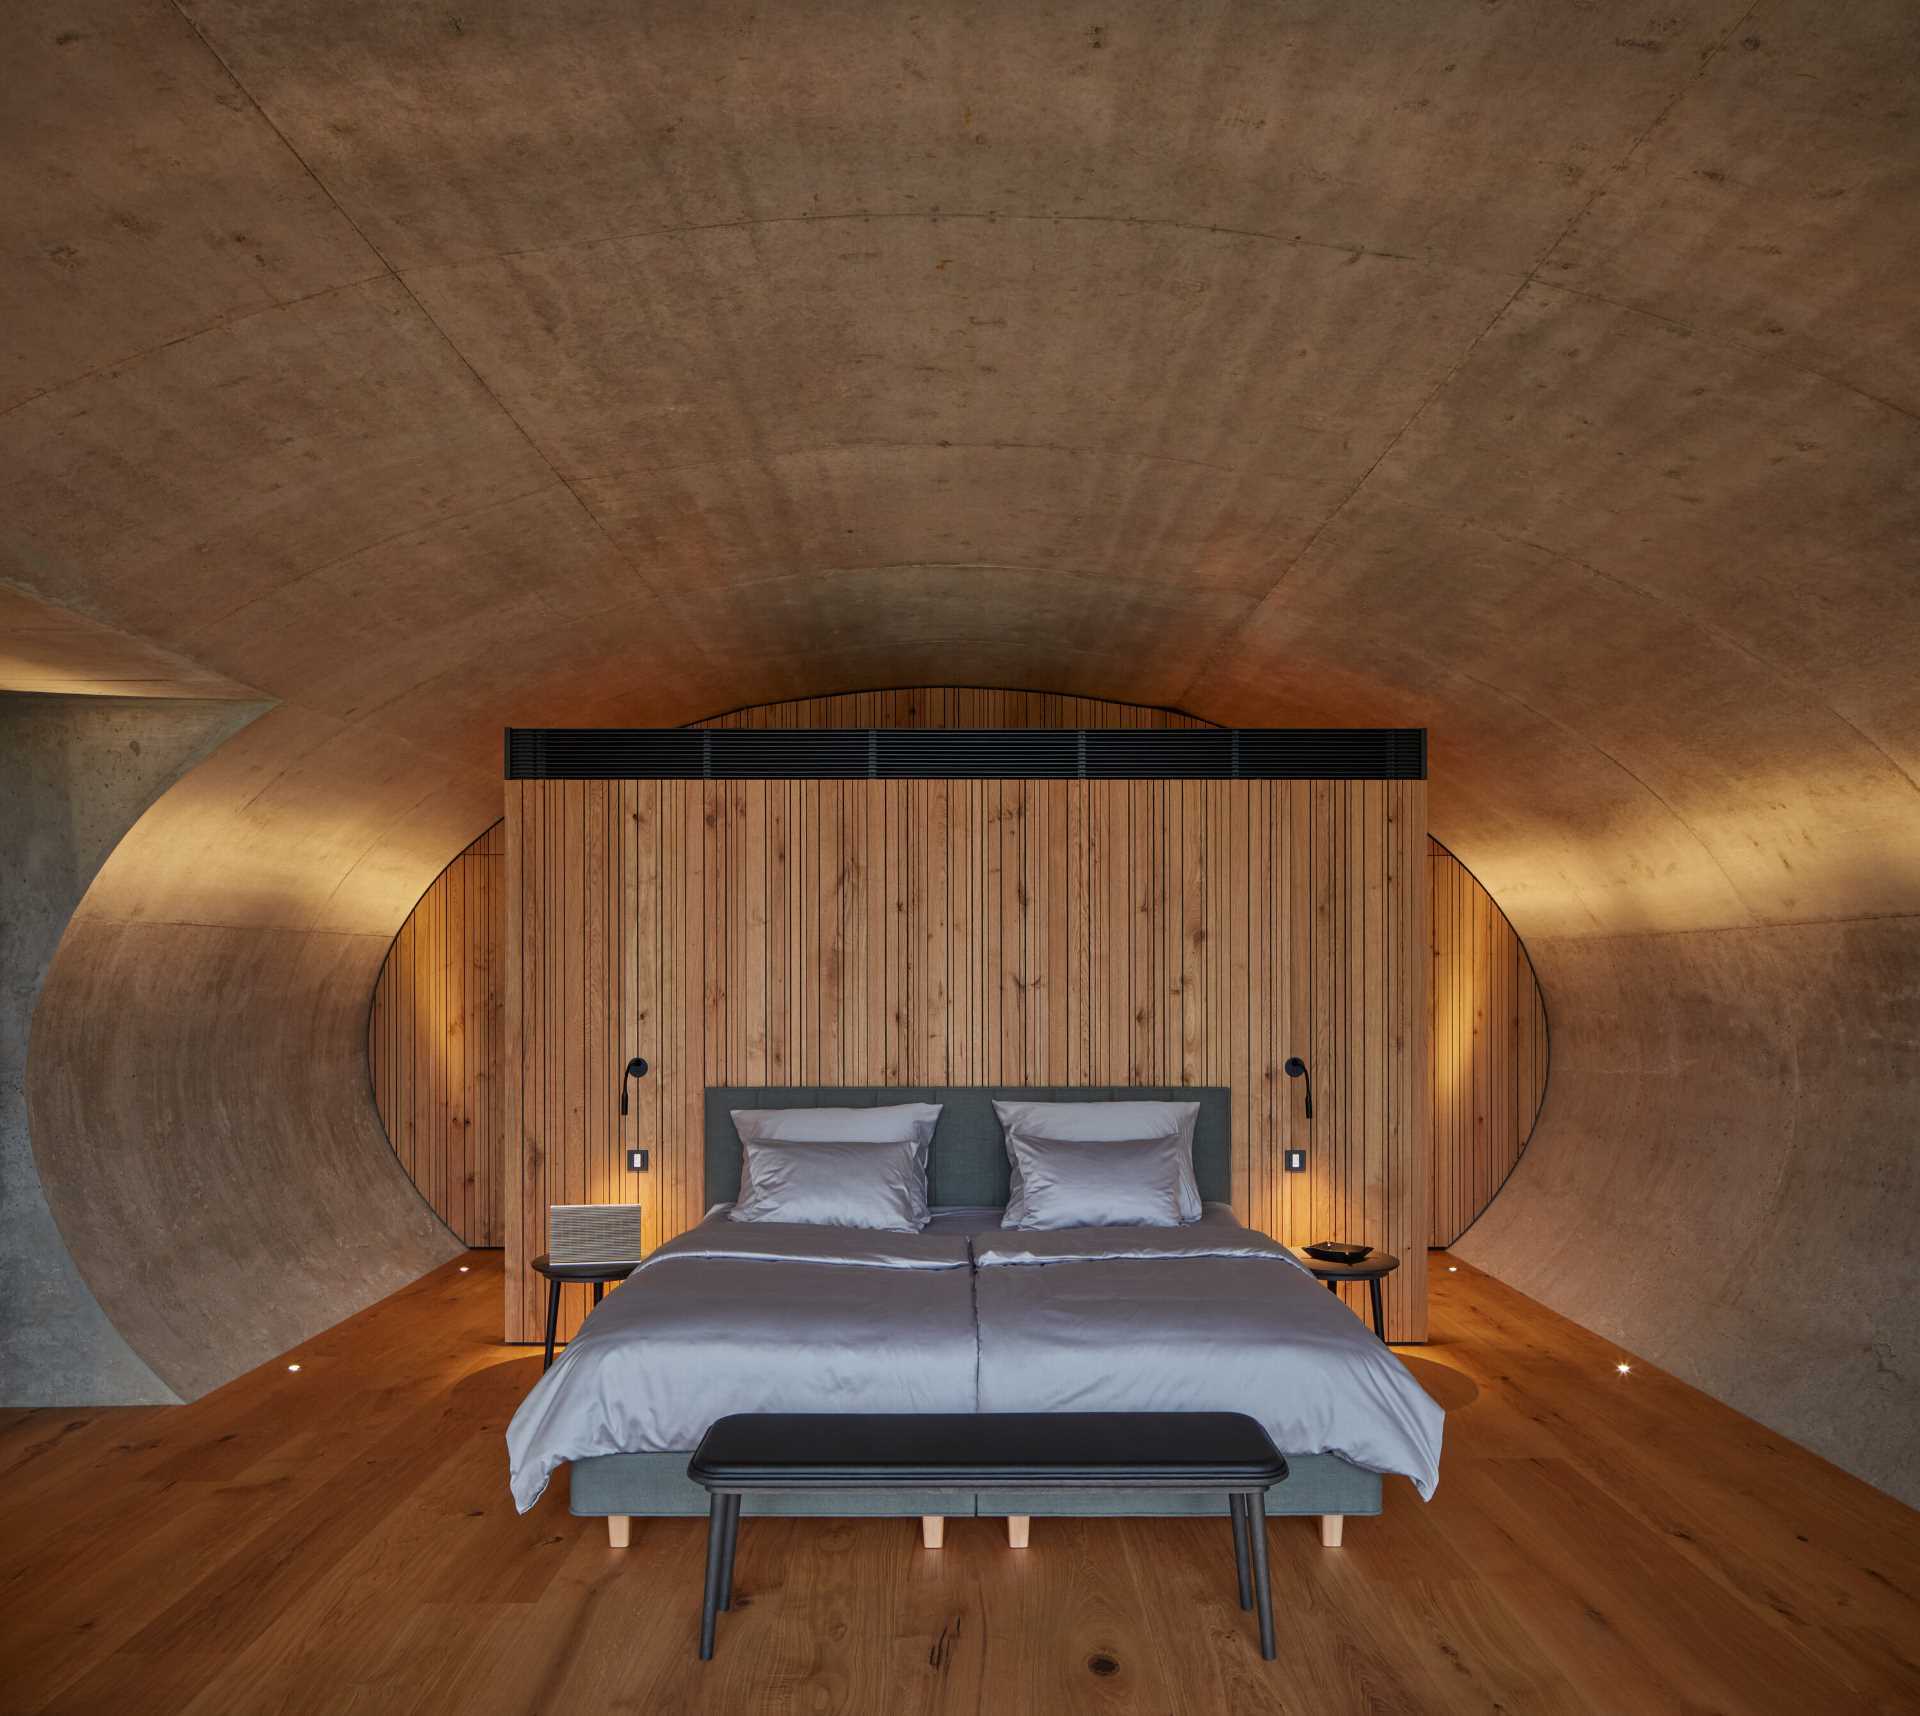 This winery hotel room has its own unique rounded design, with doors that open to a semi-private patio with views of the vineyard.